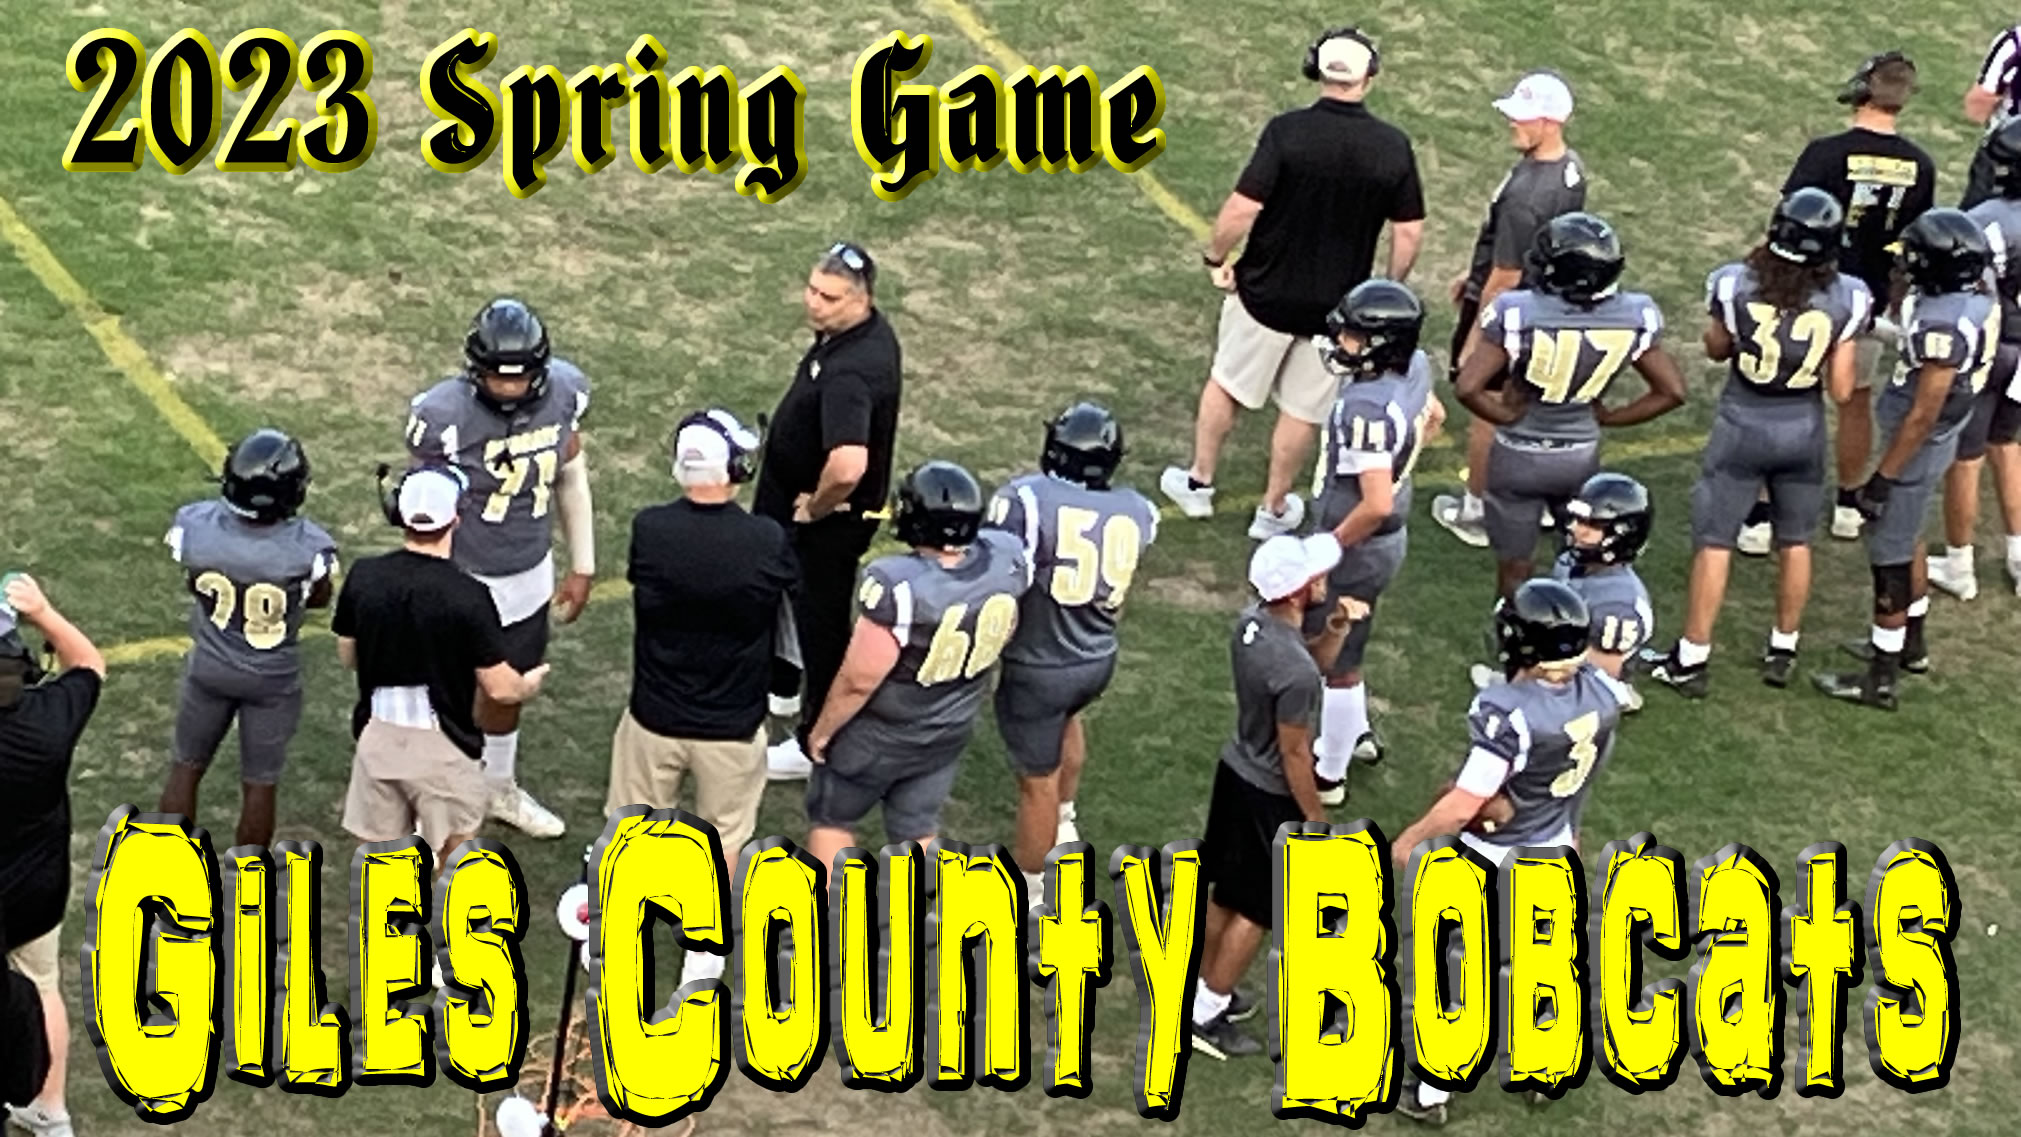 Giles County Bobcats 2023 Spring Game Sideline Picture